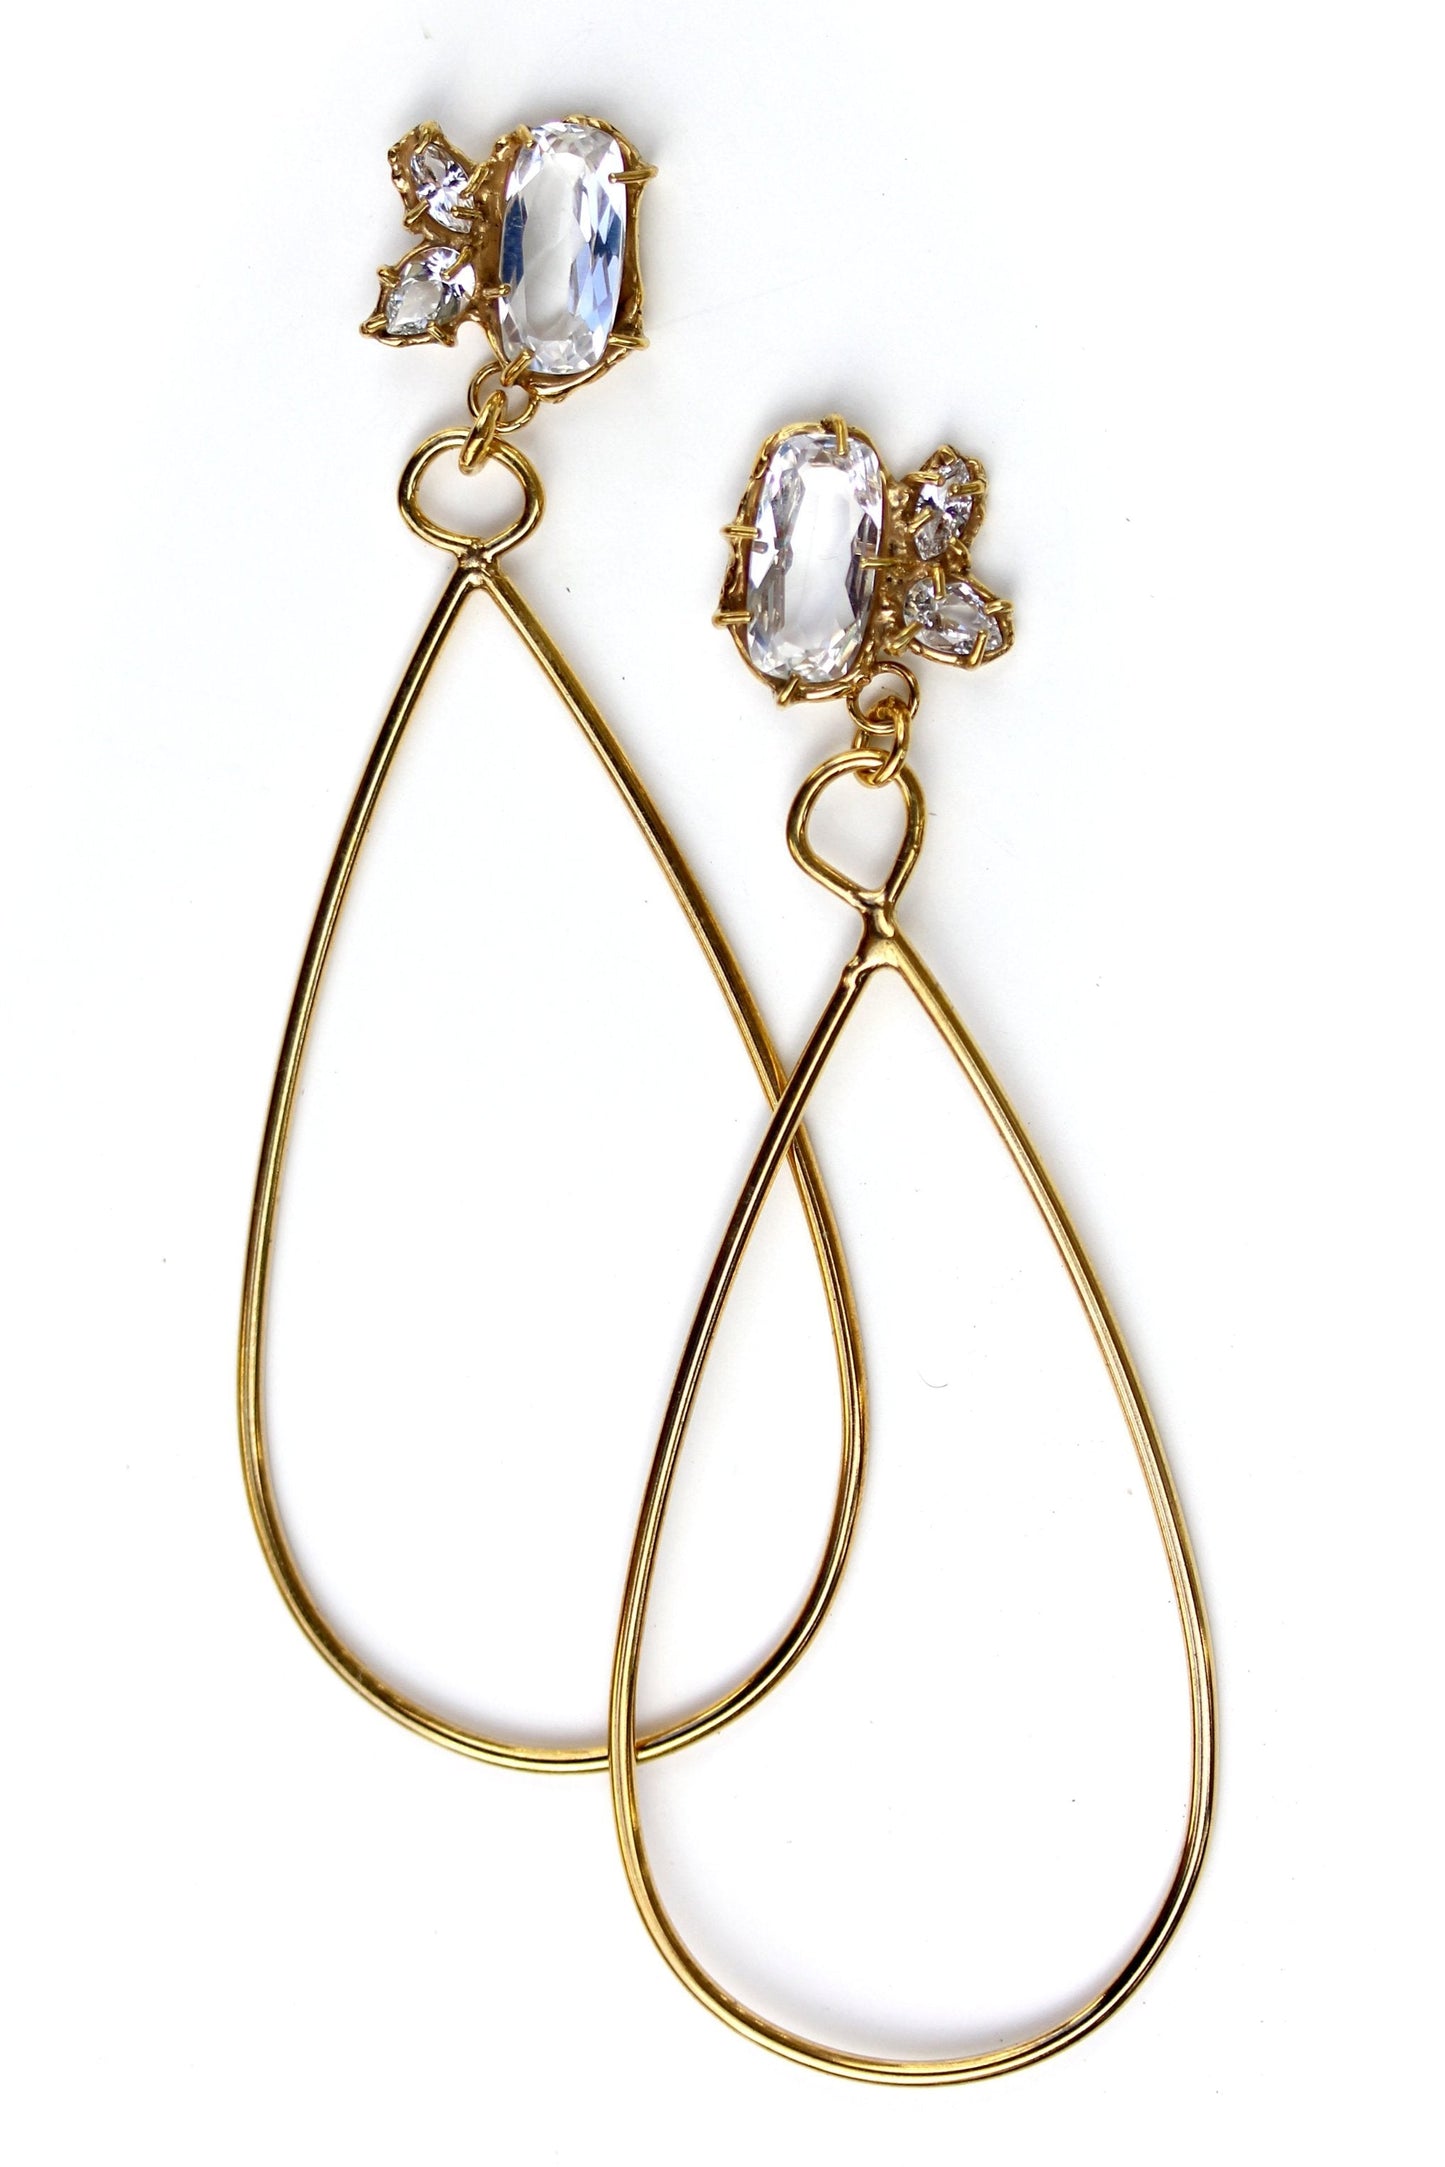 Long, gold statement earrings with a cluster of white topaz gemstone in various shapes at the top and a tear drop shaped dangle.